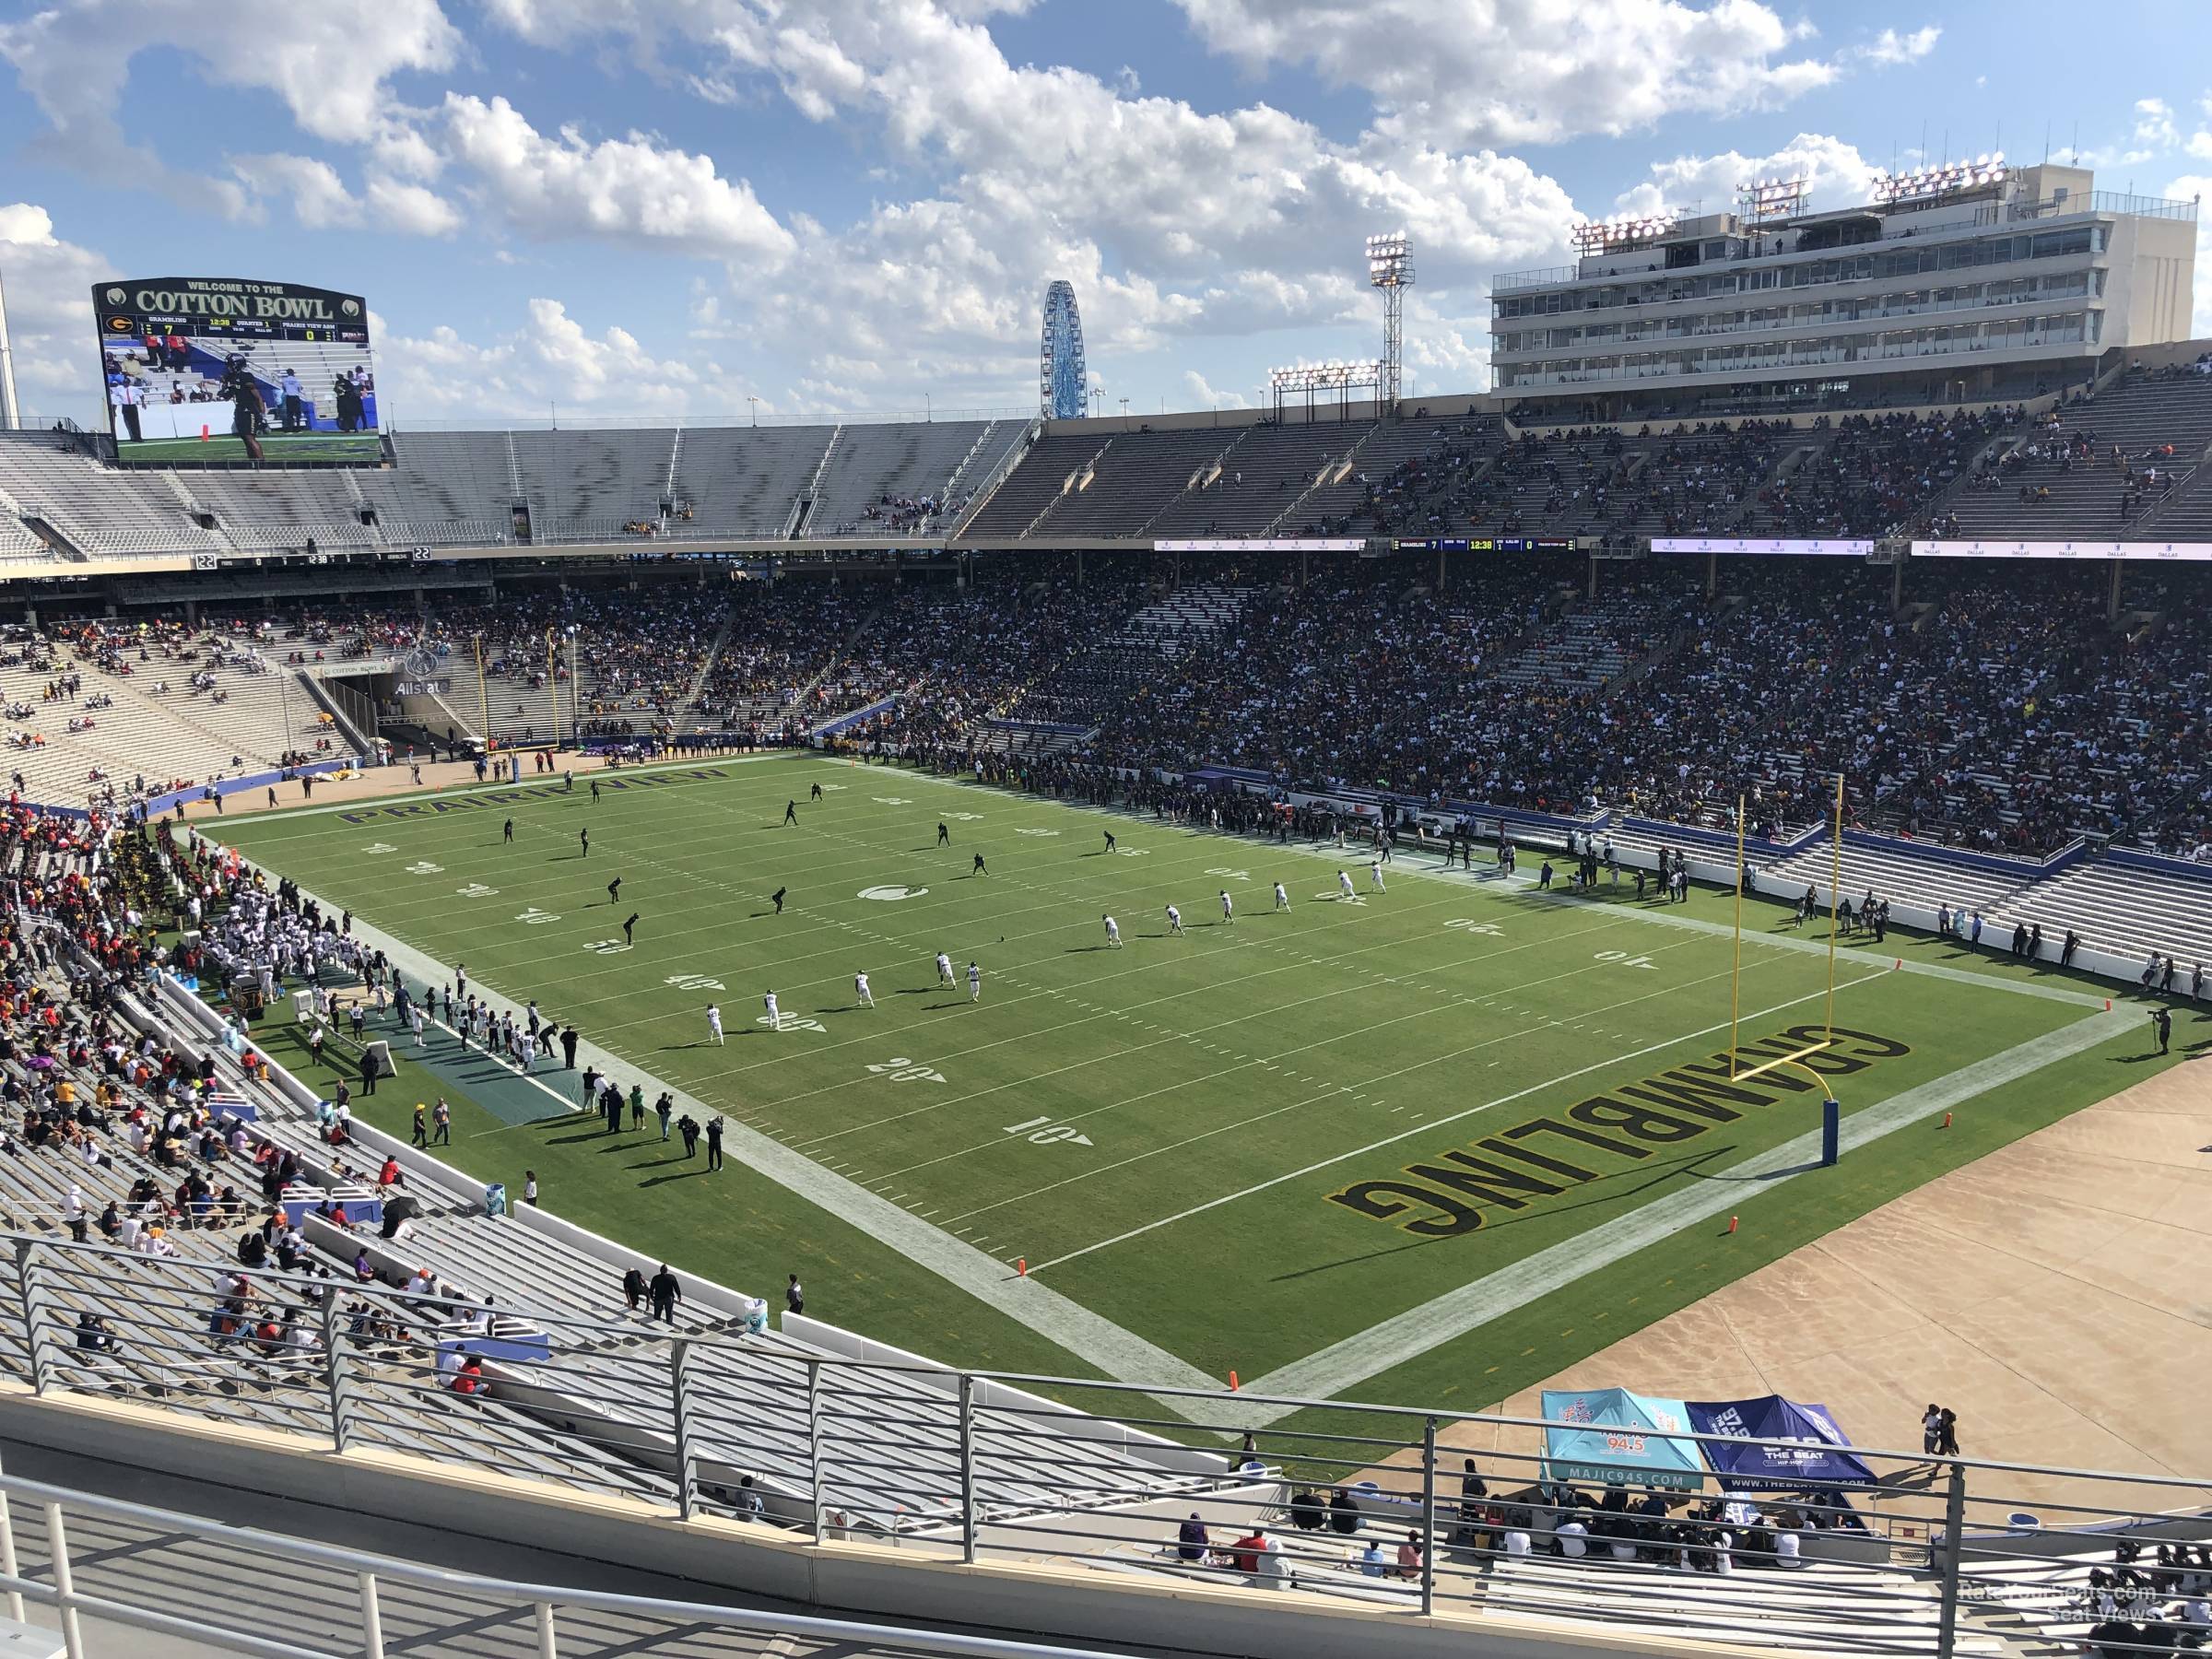 section 121, row 8 seat view  - cotton bowl